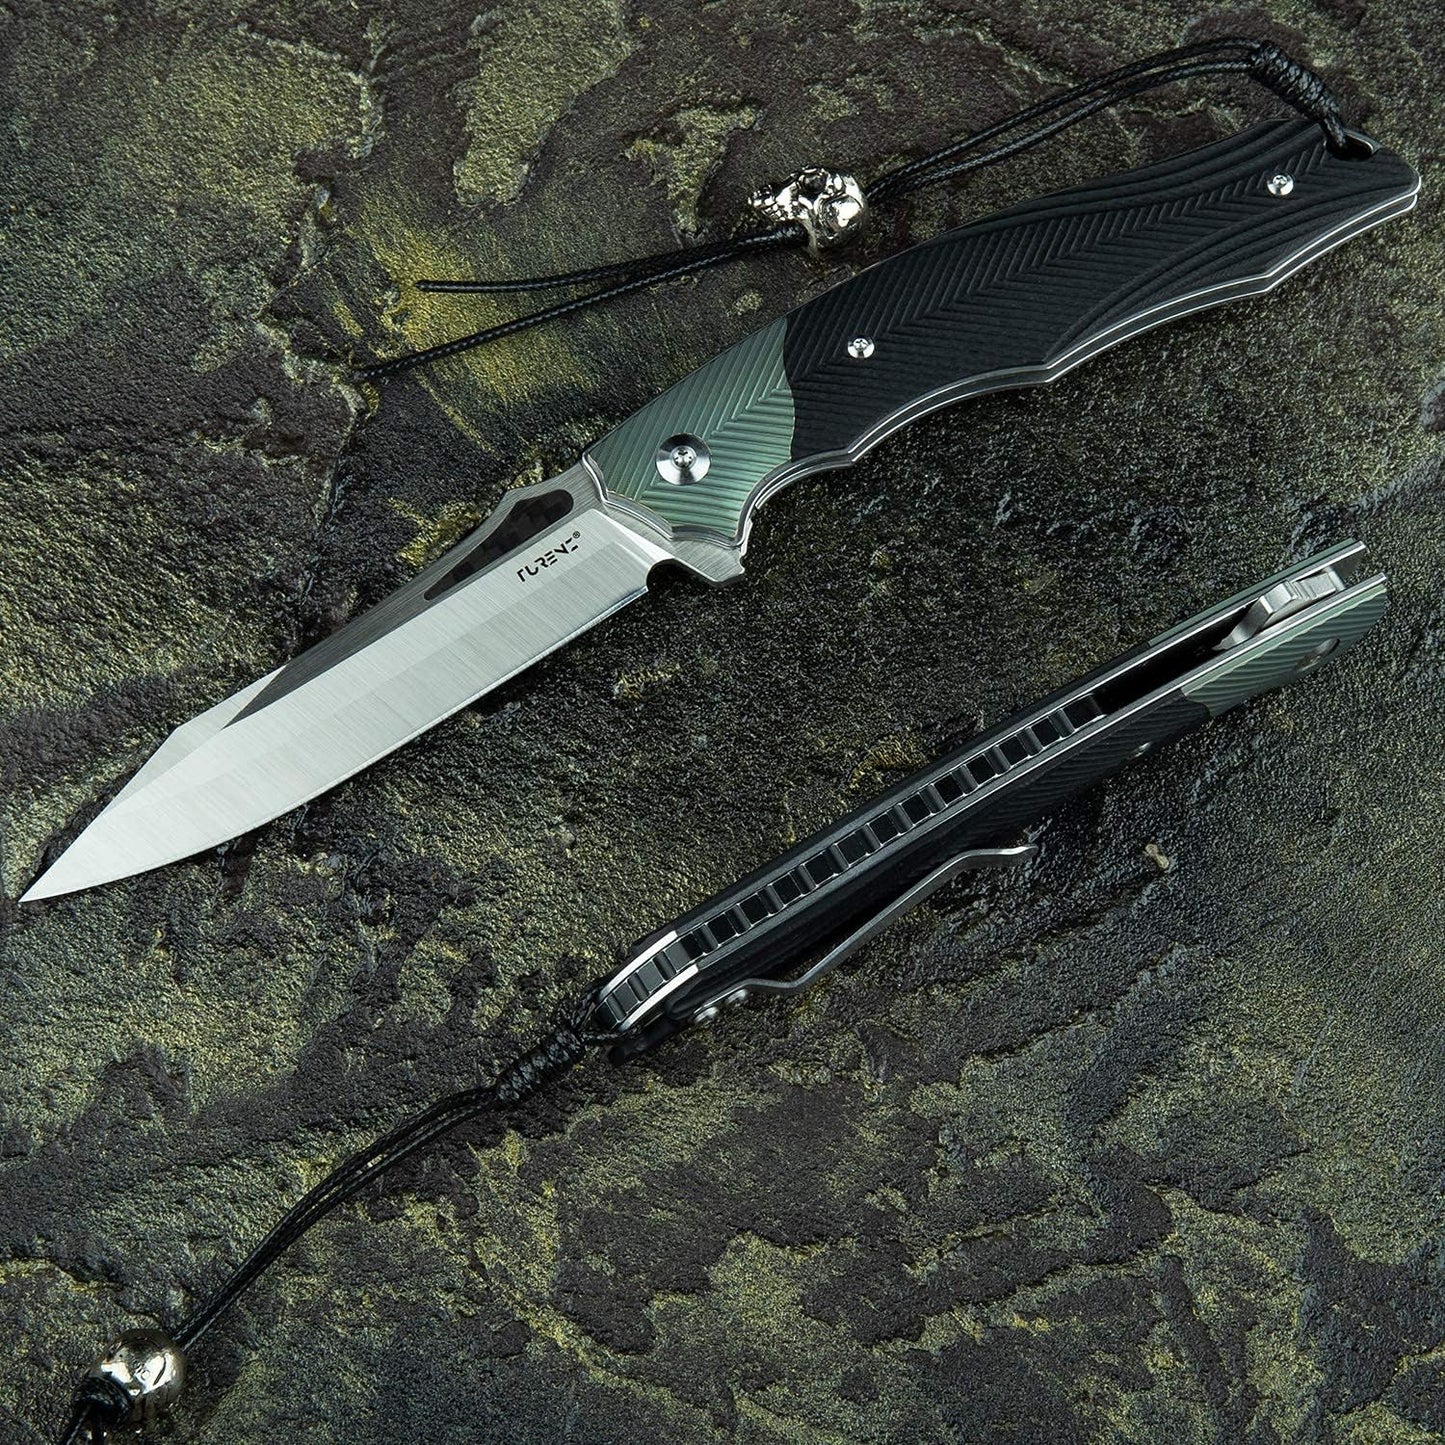 KD Folding Pocket Knife Titanium and G10 Handle Knives for Camping